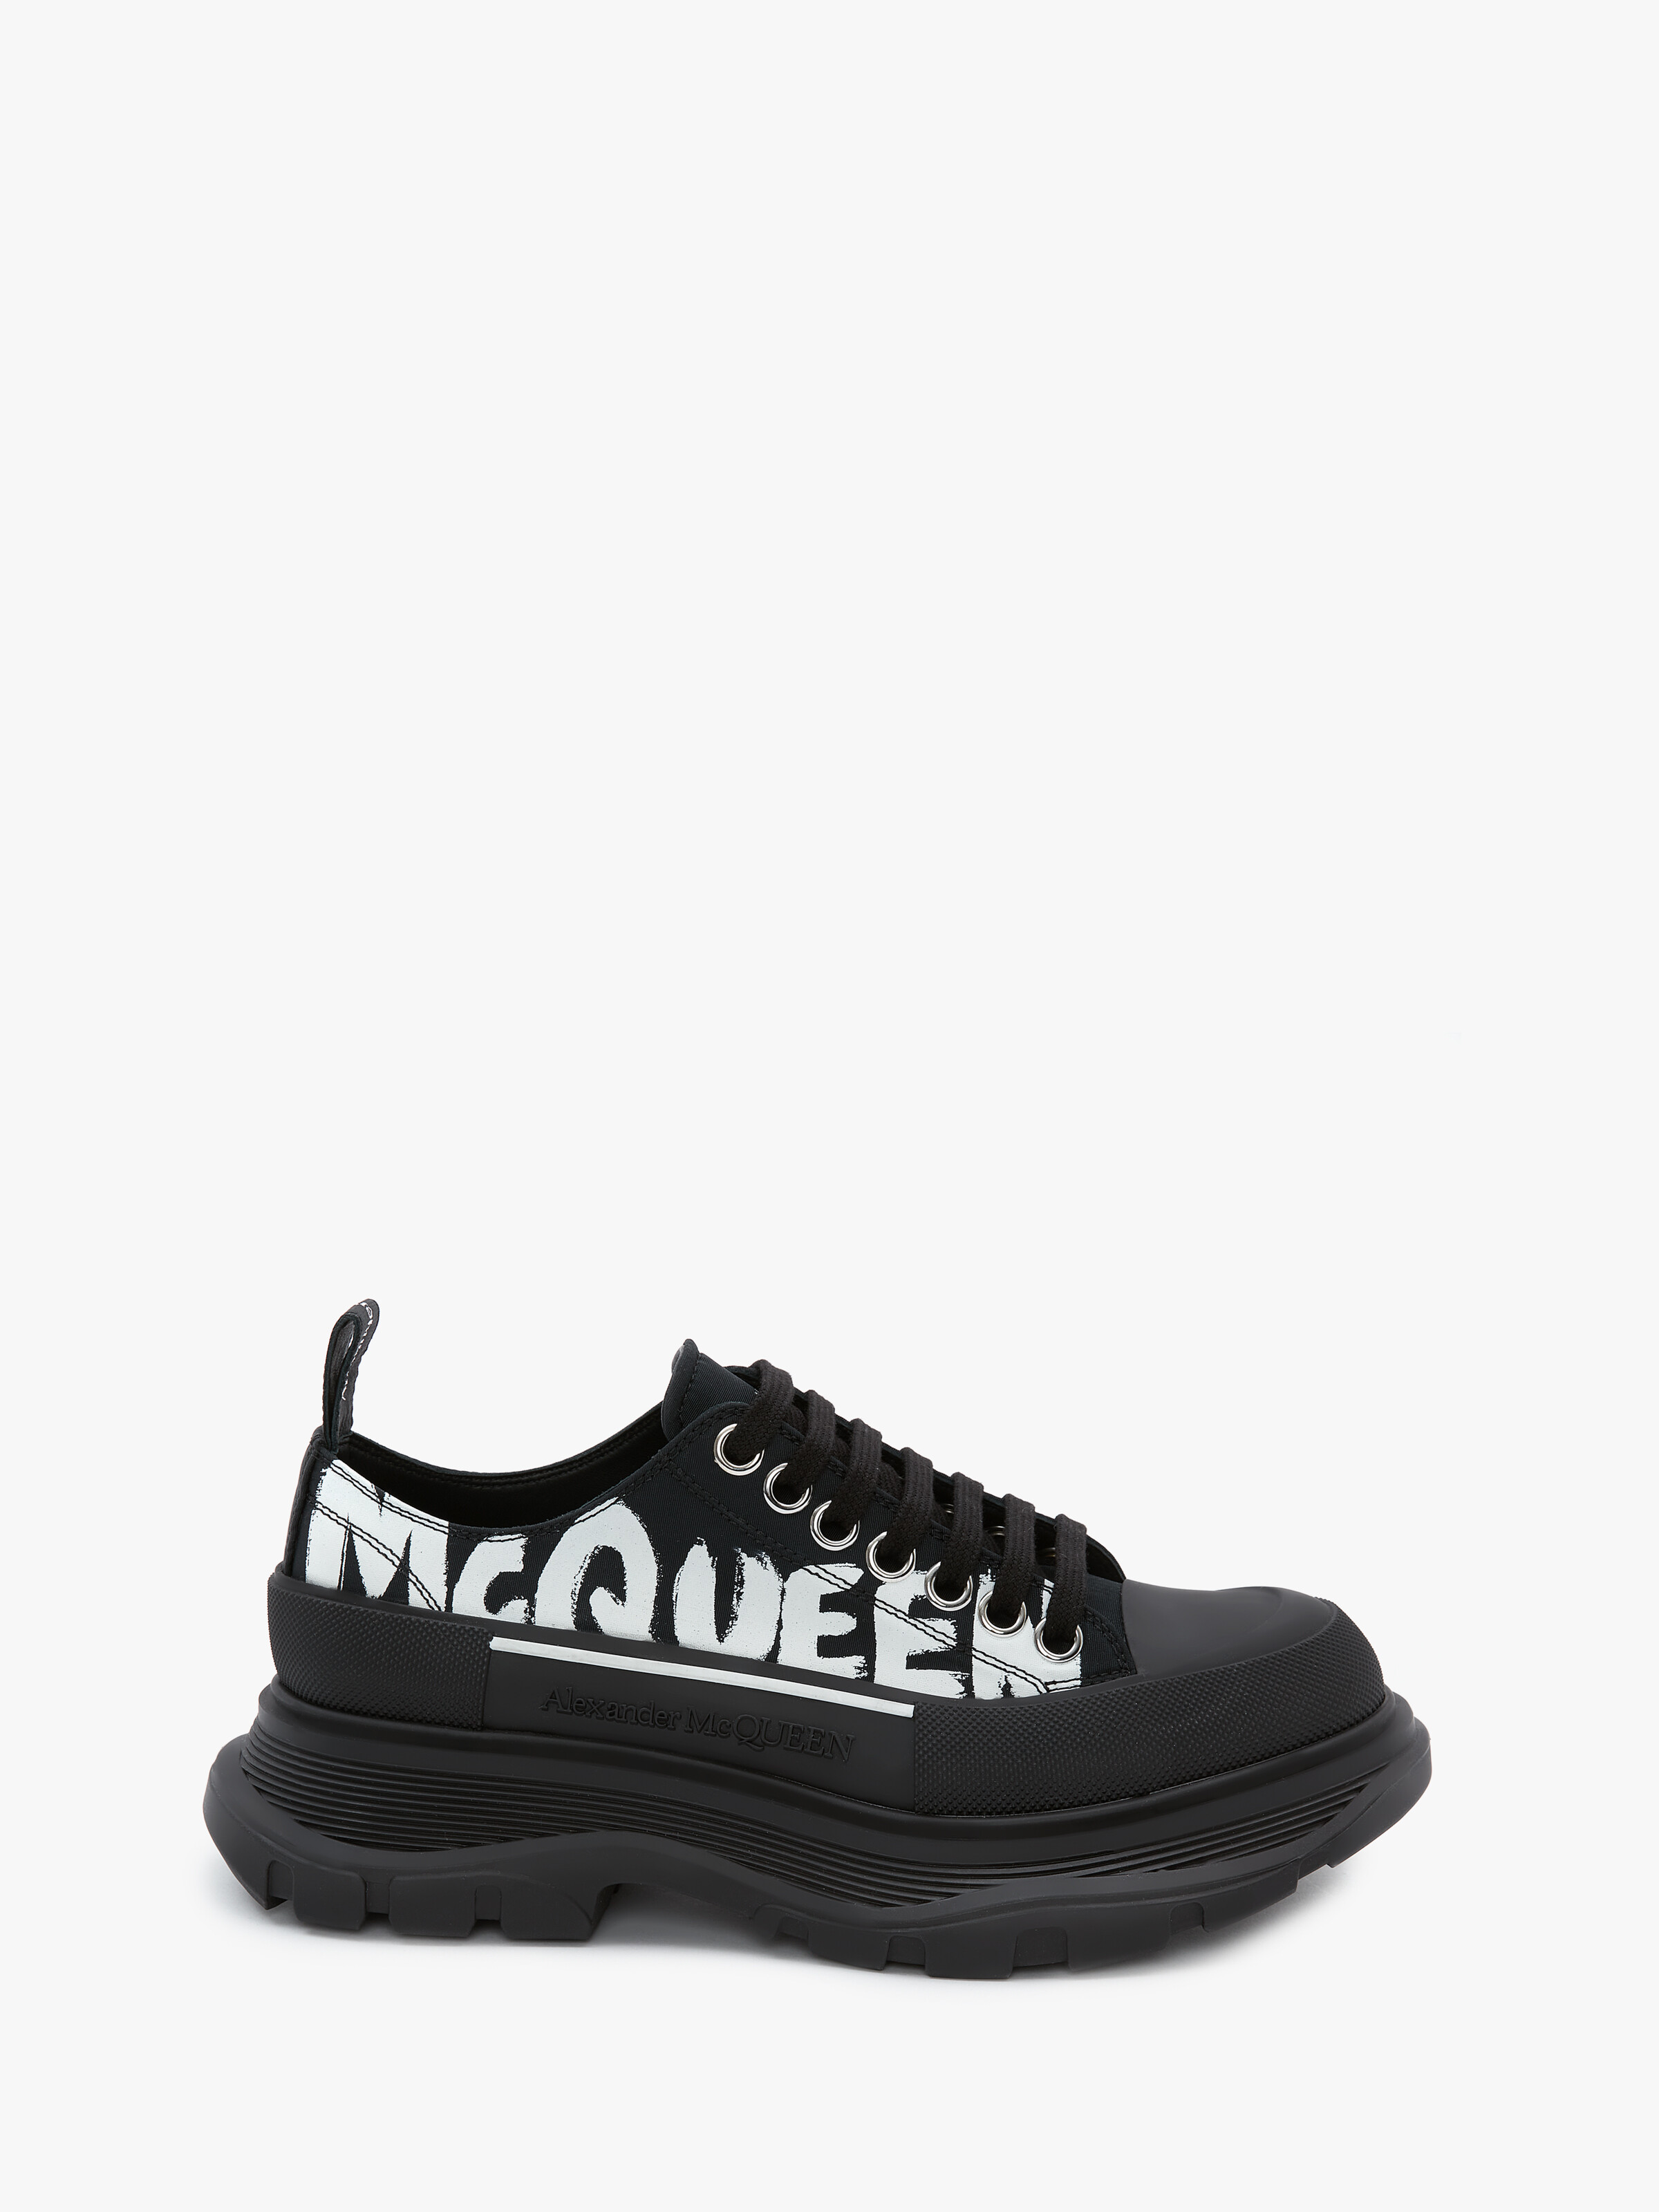 Alexander McQueen: Black Tread Lace-Up Tall Boots